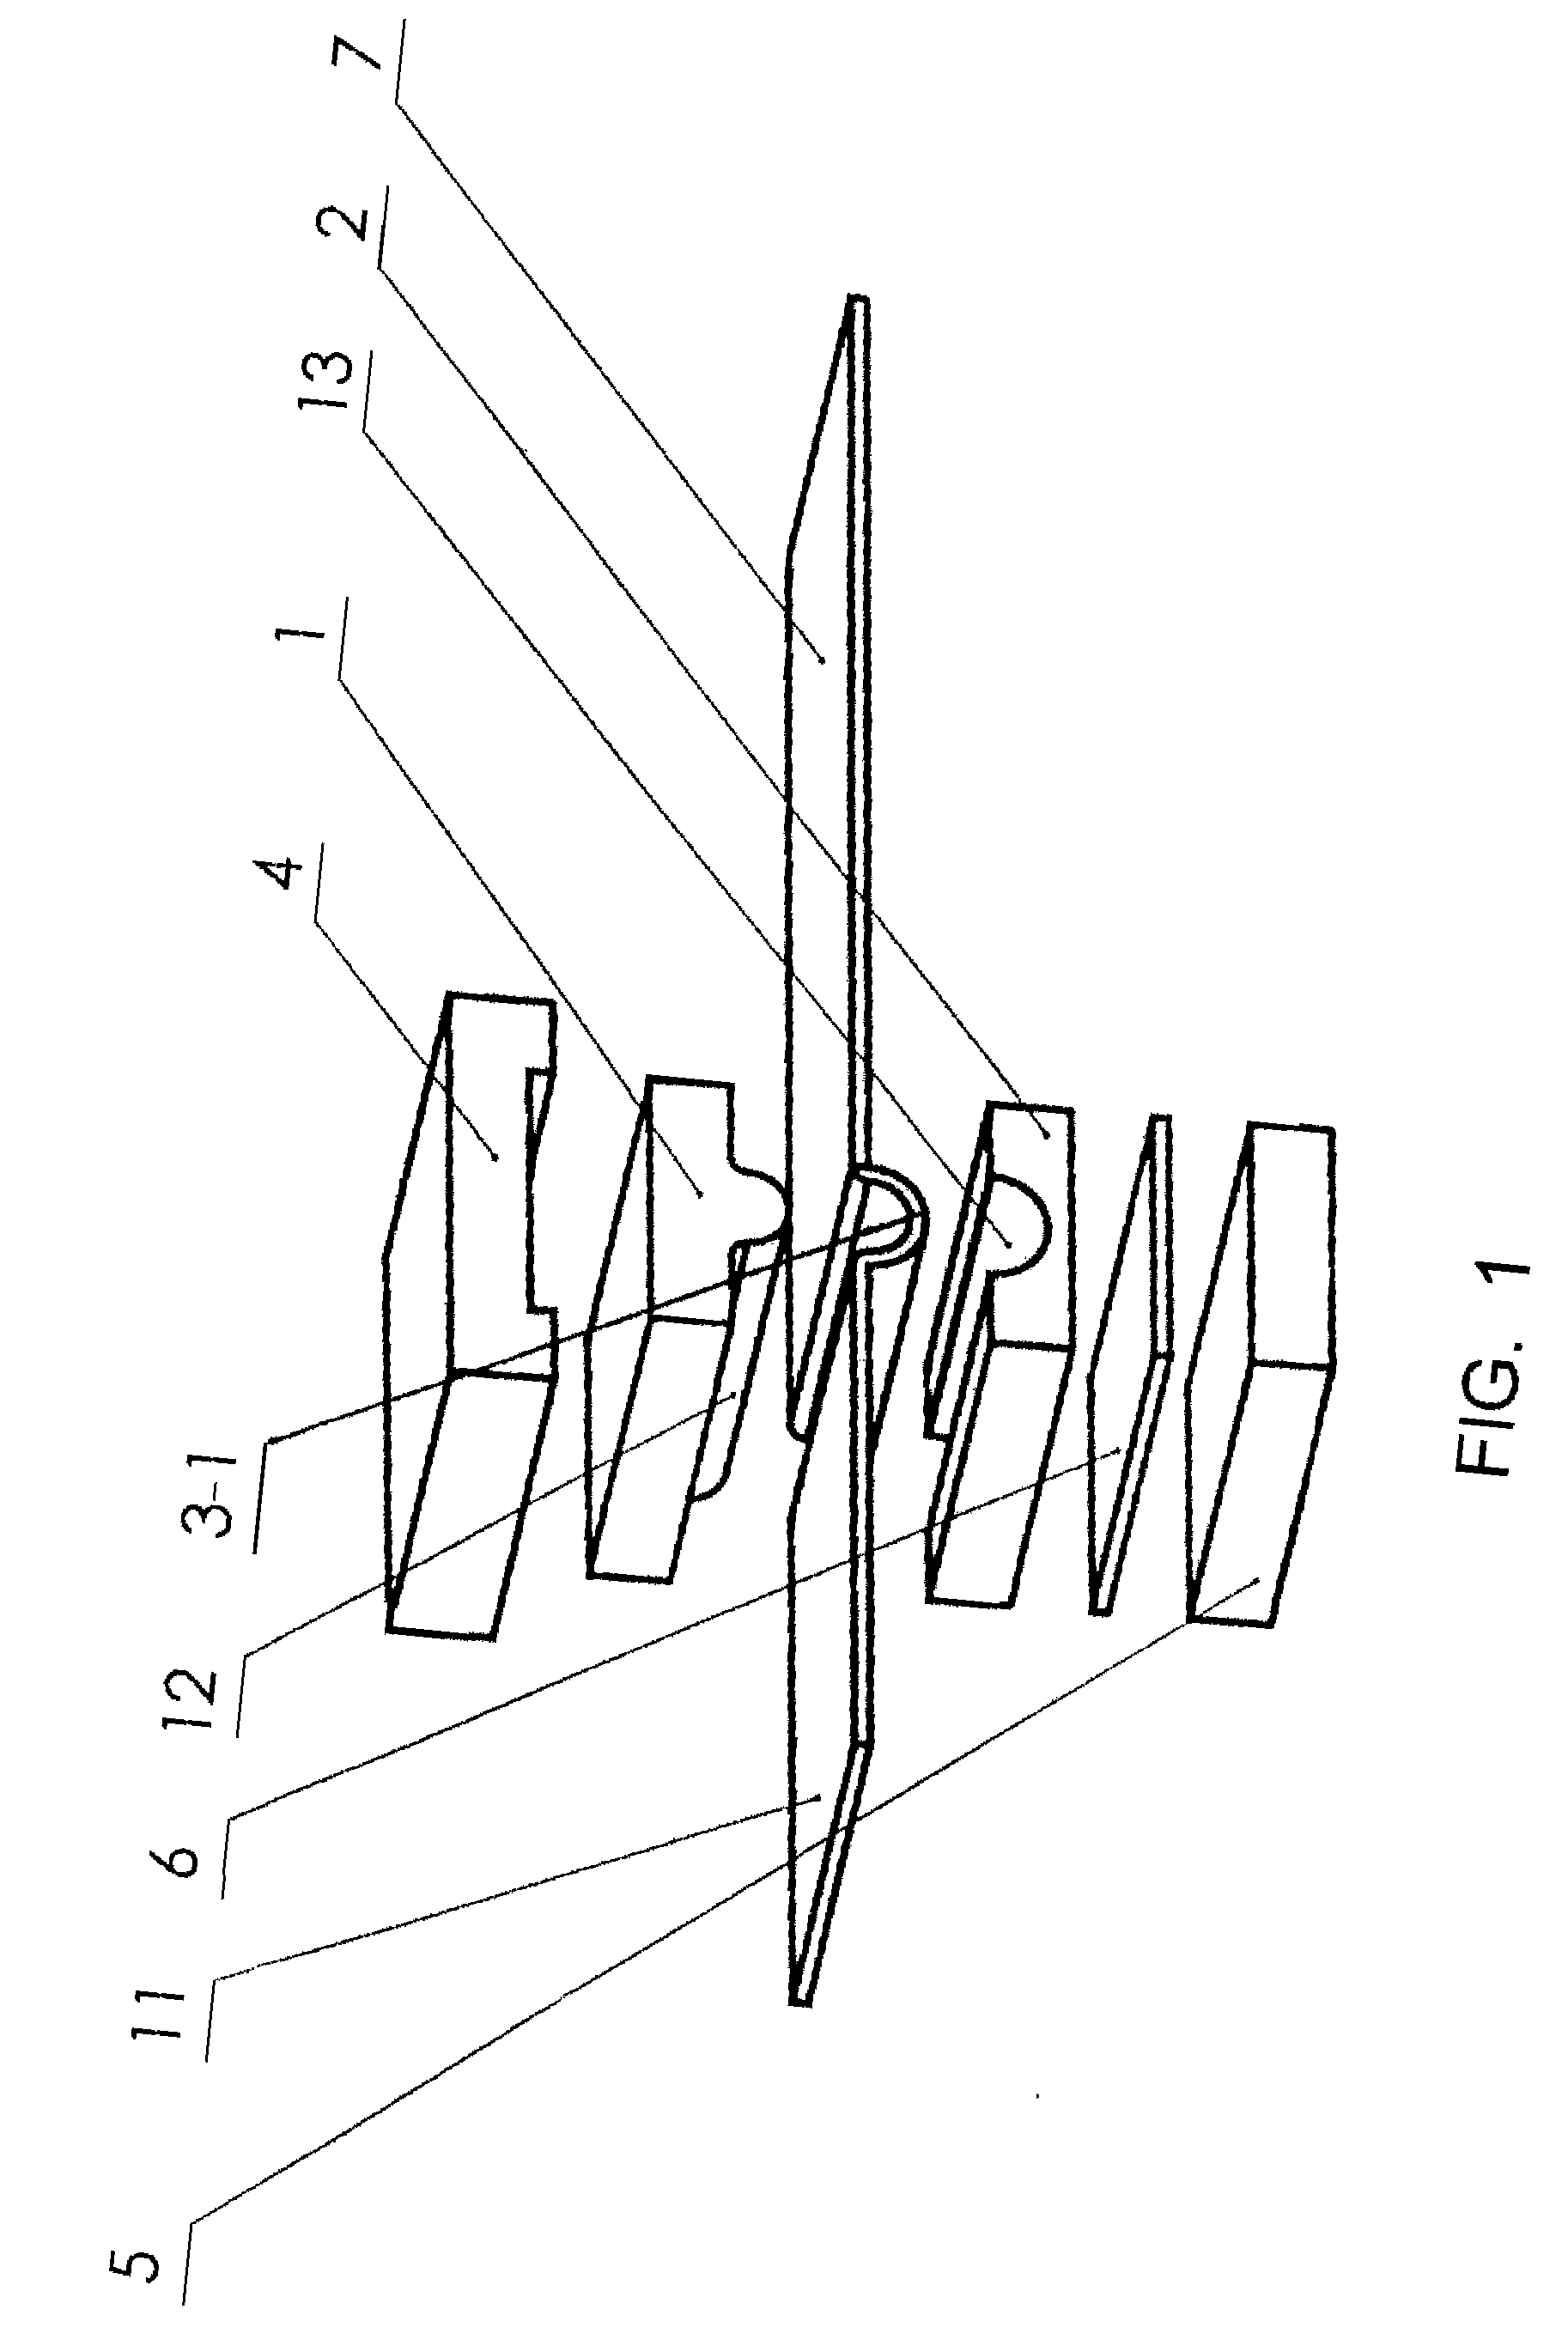 Separate Support Structure for Loudspeaker Diaphragm